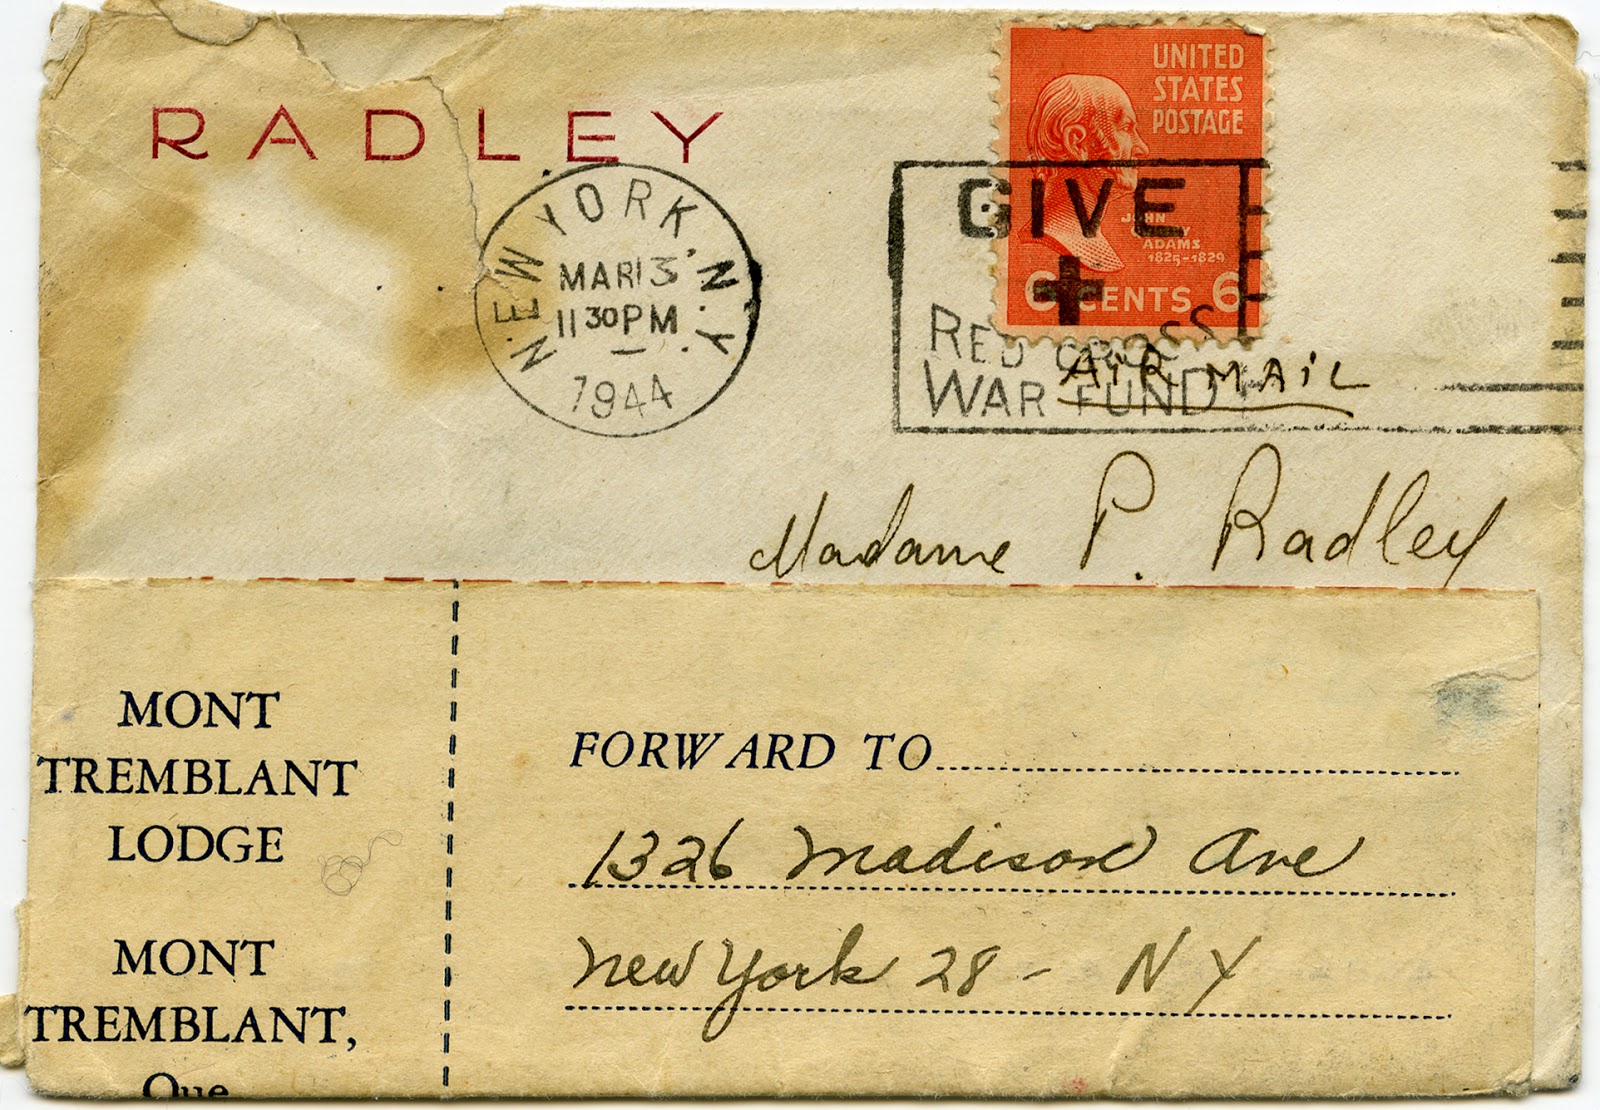 Envelope with March 1944 postmark, the name "RADLEY" printed in red for the sender. The addressee is Madame P. Radley, but there is a forwarding address sticker placed over the original address.